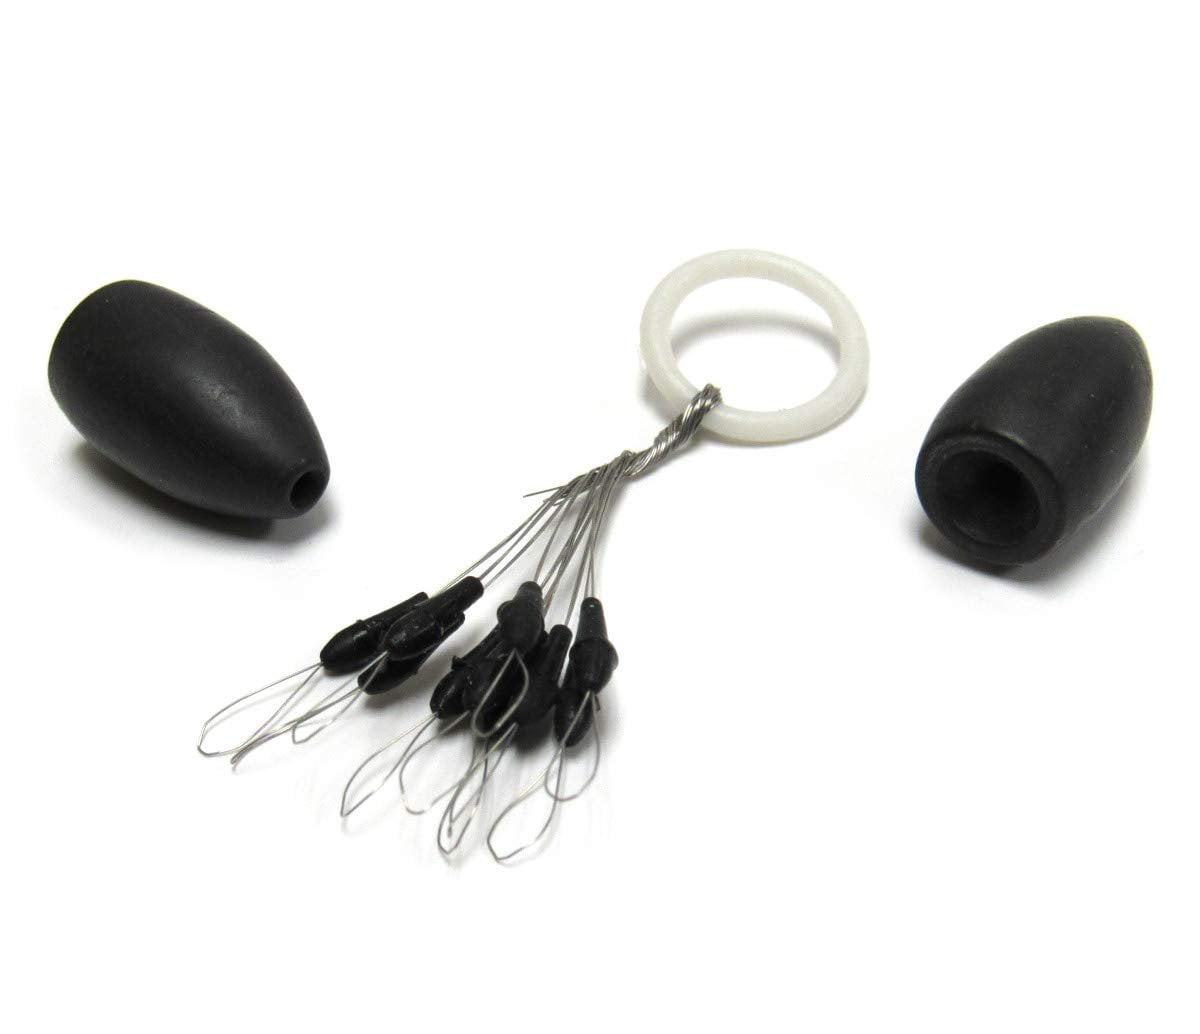 8 Weight Pack Black Color Tungsten Flipping Weights 3/4 OZ